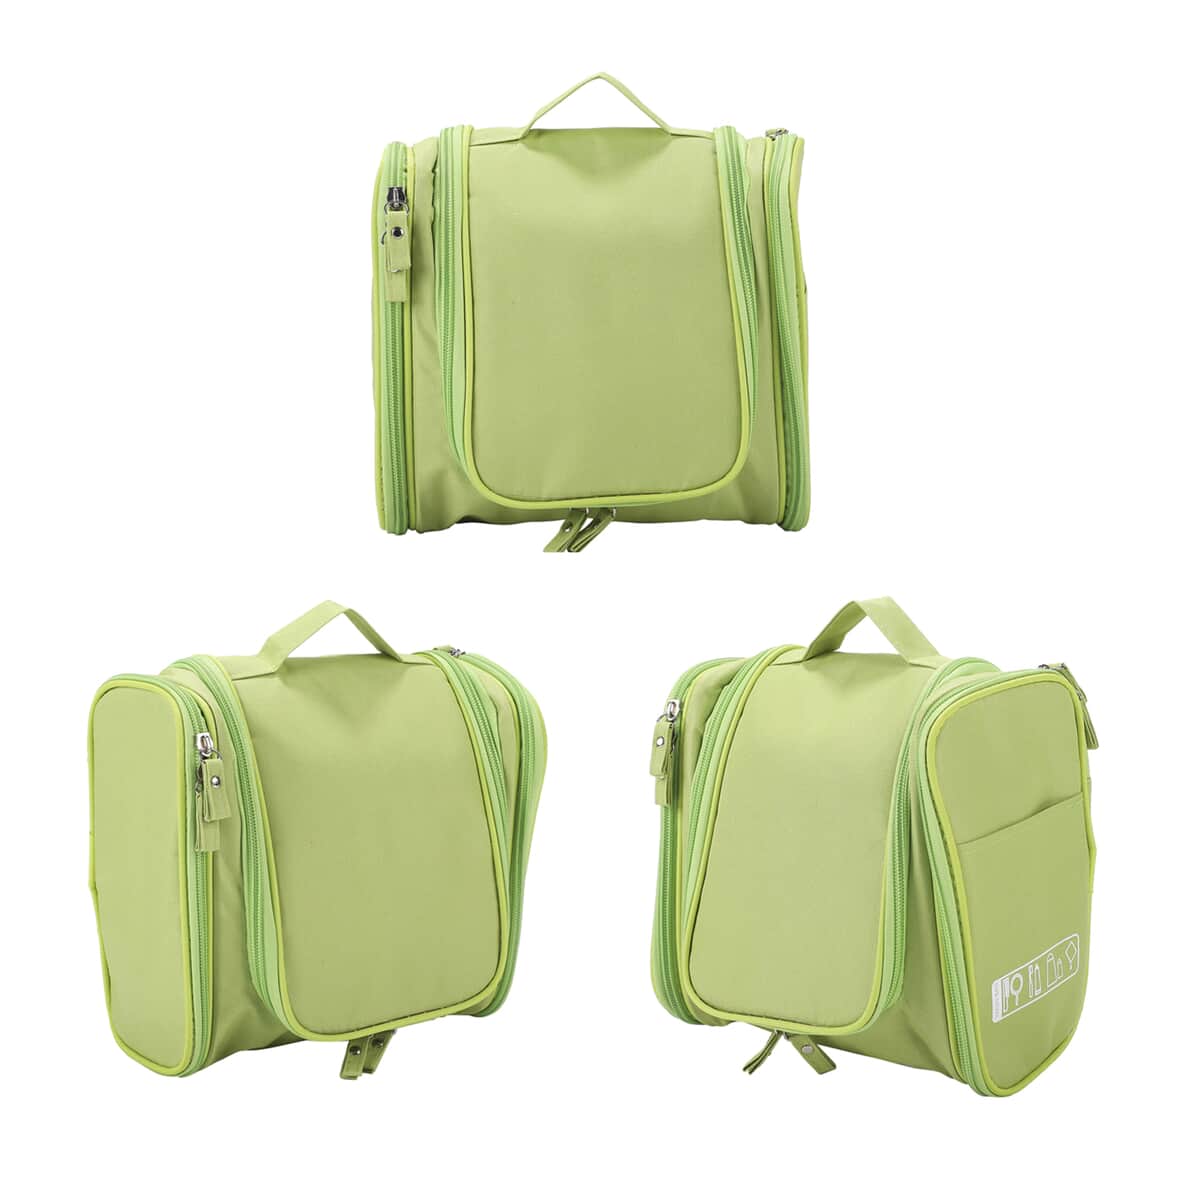 HOMESMART Green Travel Toiletry Bag (9.45"x9.84"x3.94") image number 2